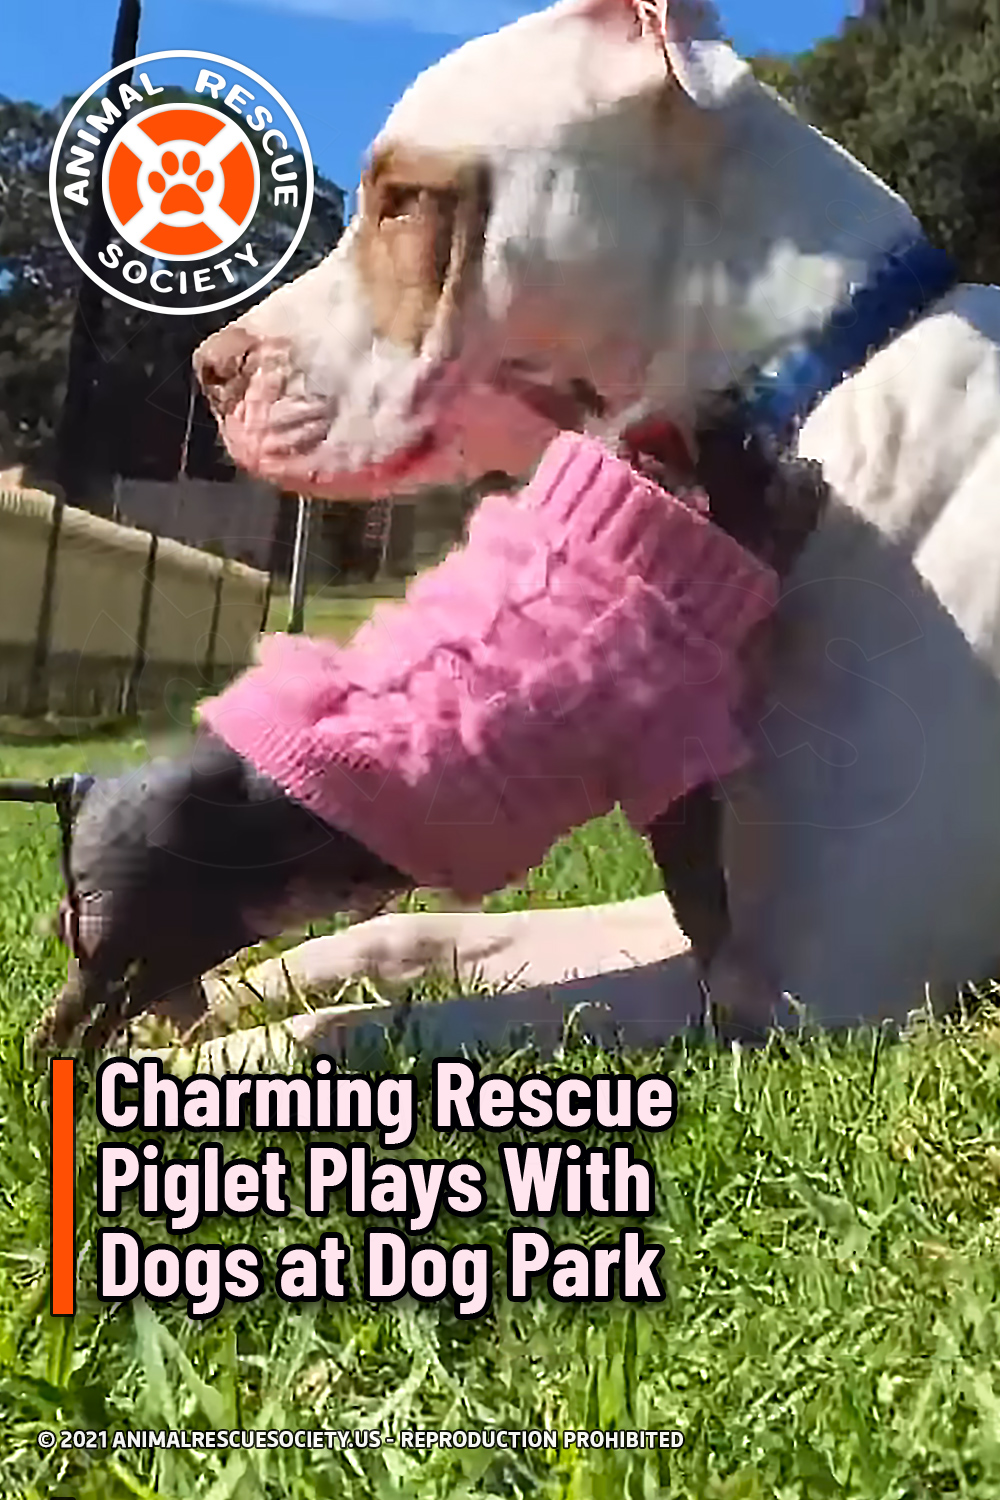 Charming Rescue Piglet Plays With Dogs at Dog Park